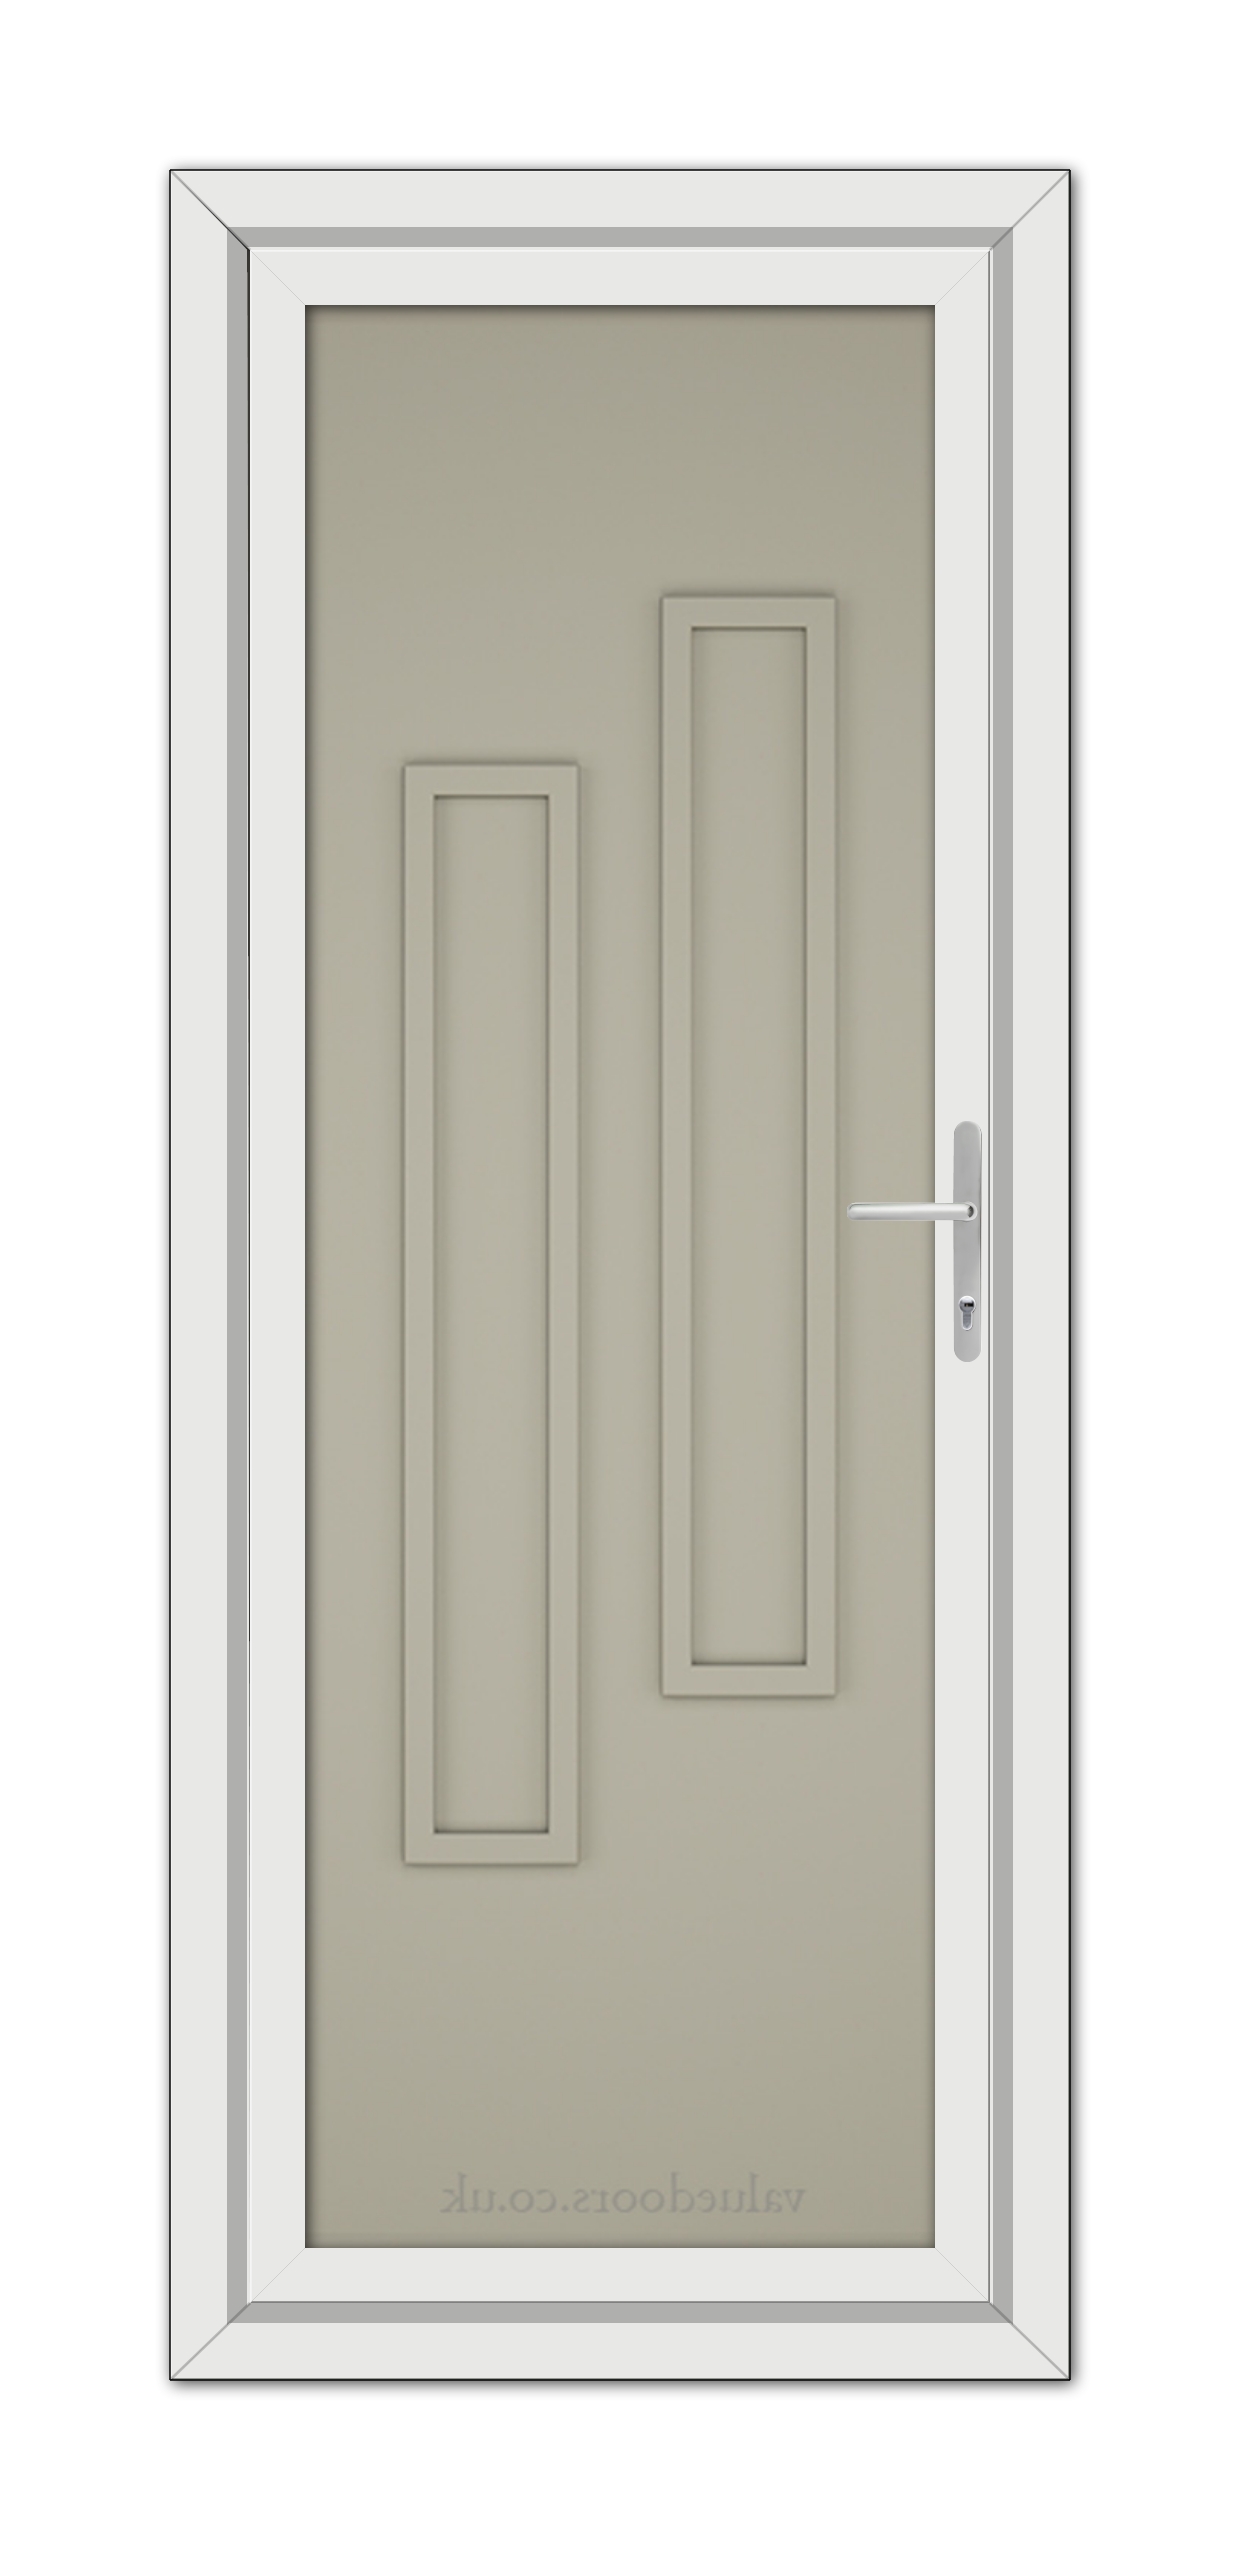 A Pebble Grey Modern 5082 Solid uPVC Door with a minimalist design and a metallic handle, set within a plain white frame.